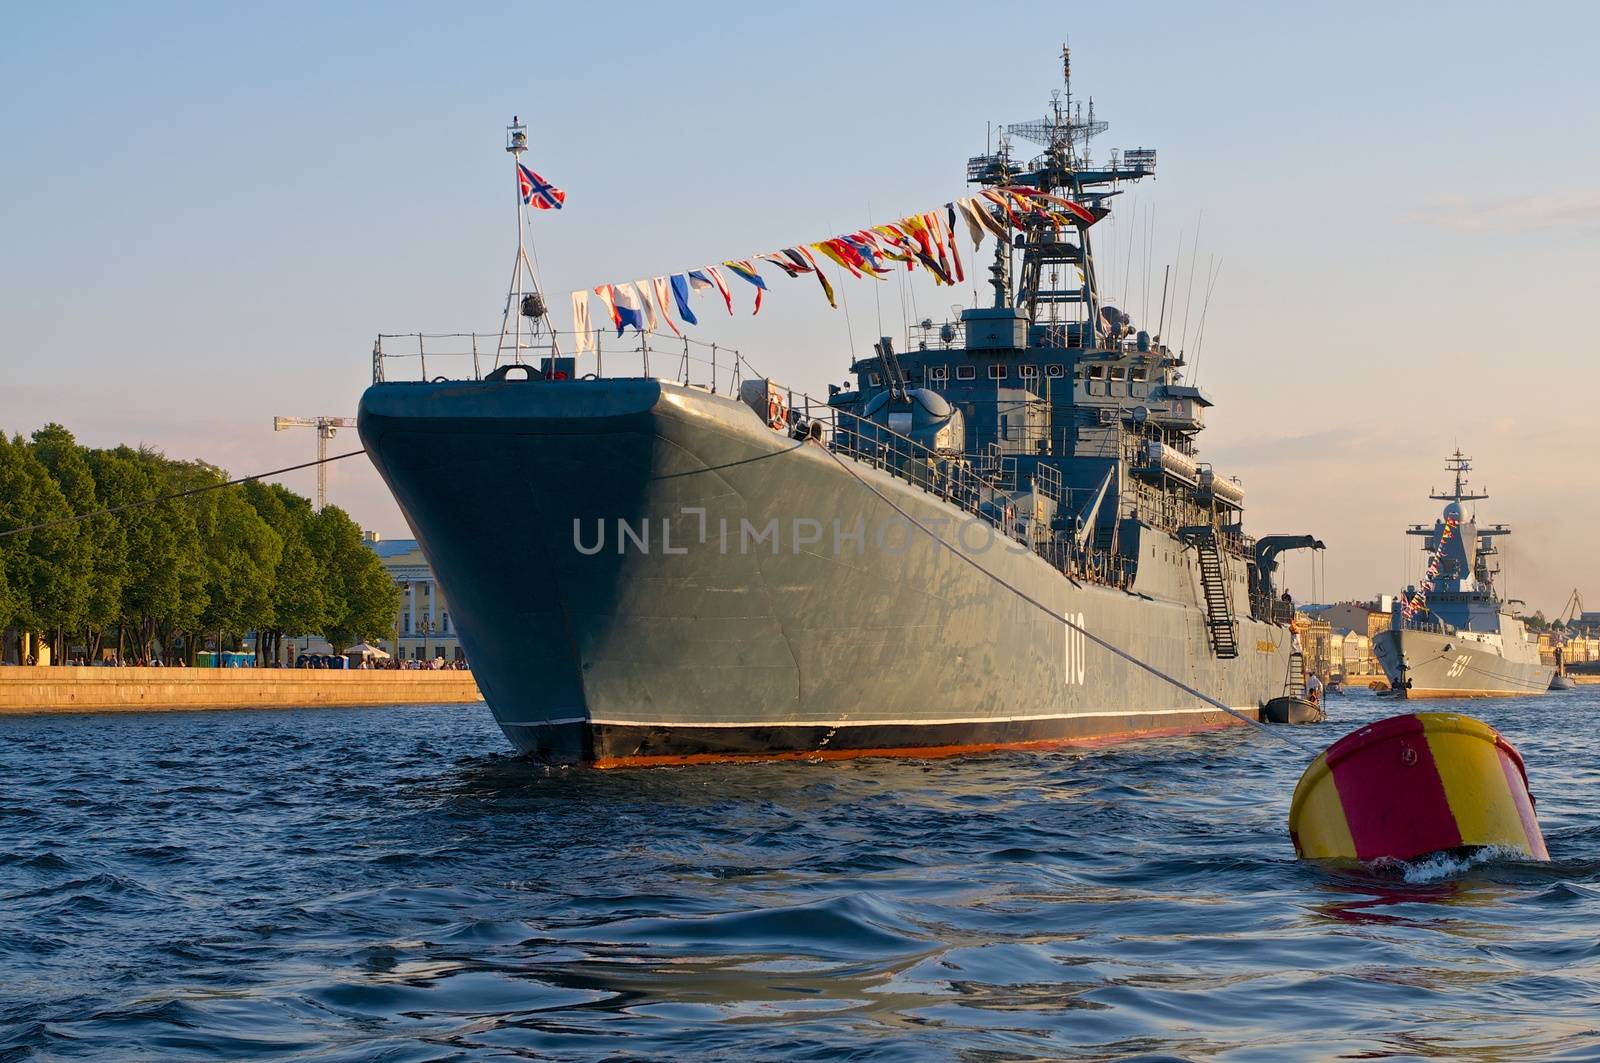 The picture of the Russian warship in Saint Petersburg